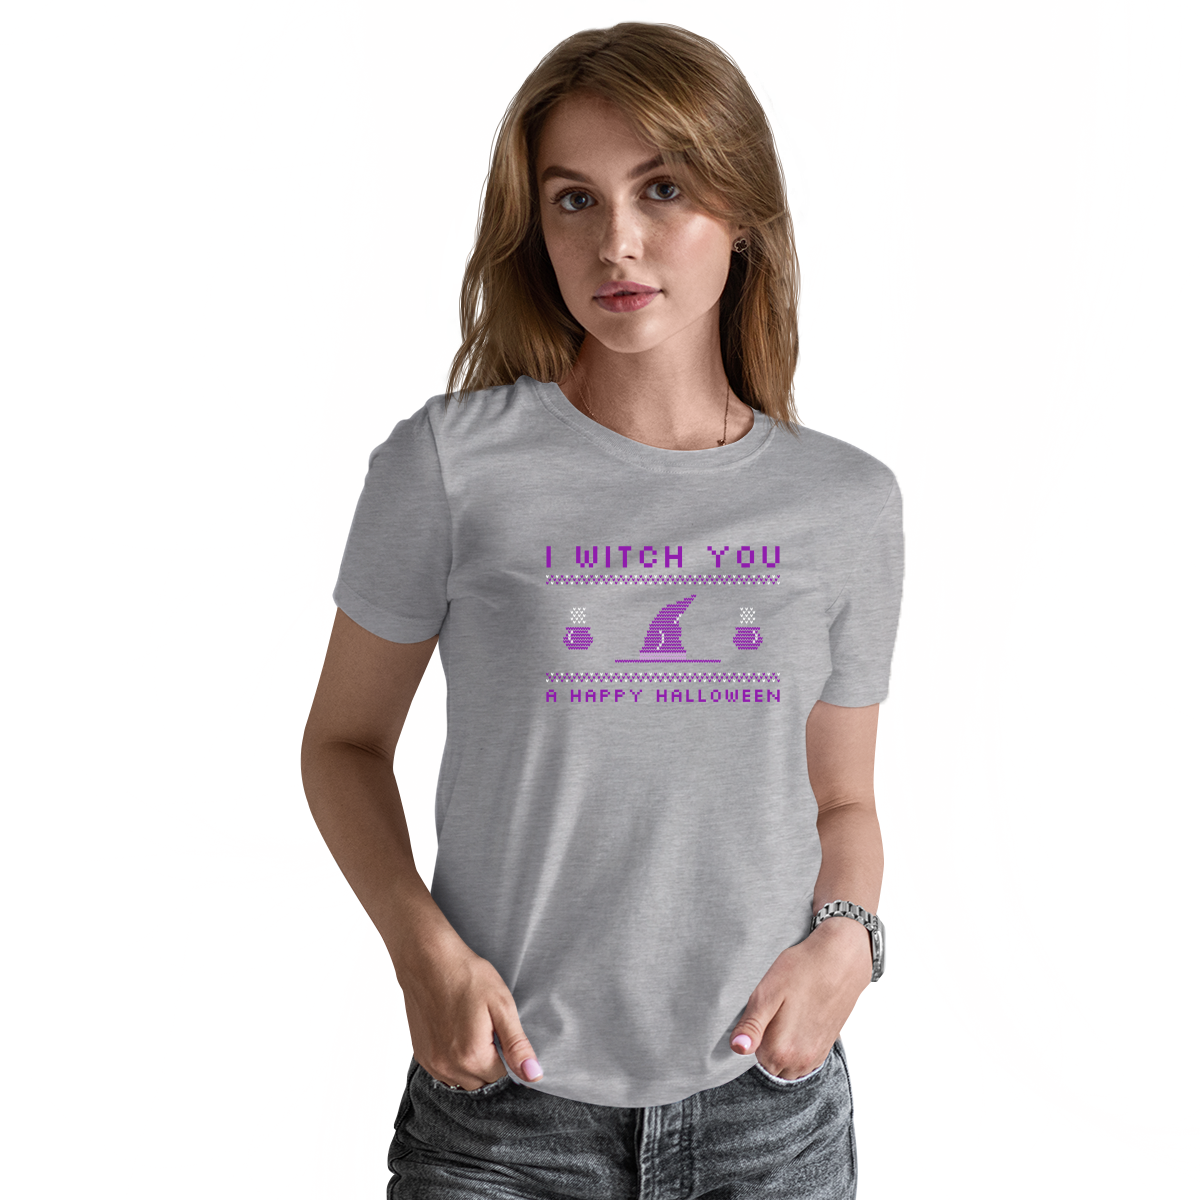 I Witch You a Happy Halloween Women's T-shirt | Gray